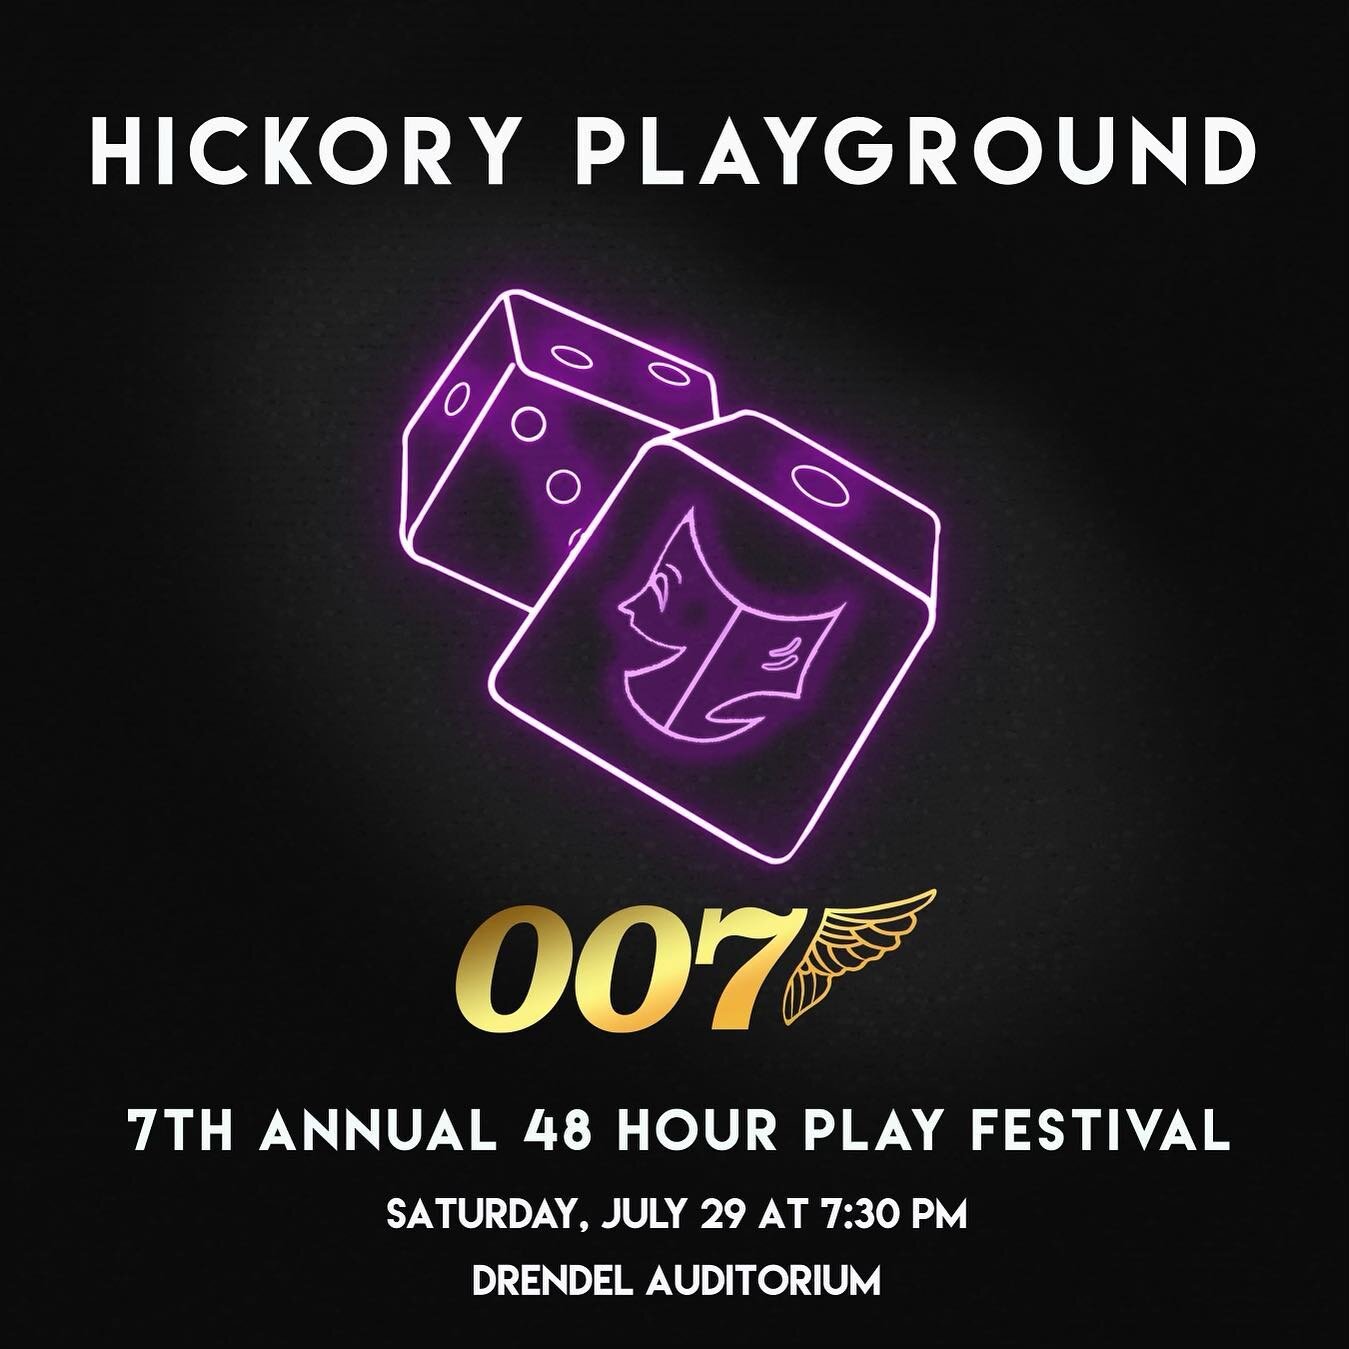 Top Secret Mission: Playground Royale! 🎲

Join us on July 29 at 7:30PM at the Drendel Auditorium for the 7th Annual Hickory Playground Theater Festival! Free tickets are available at the door with a suggested donation and all our proceeds go directl